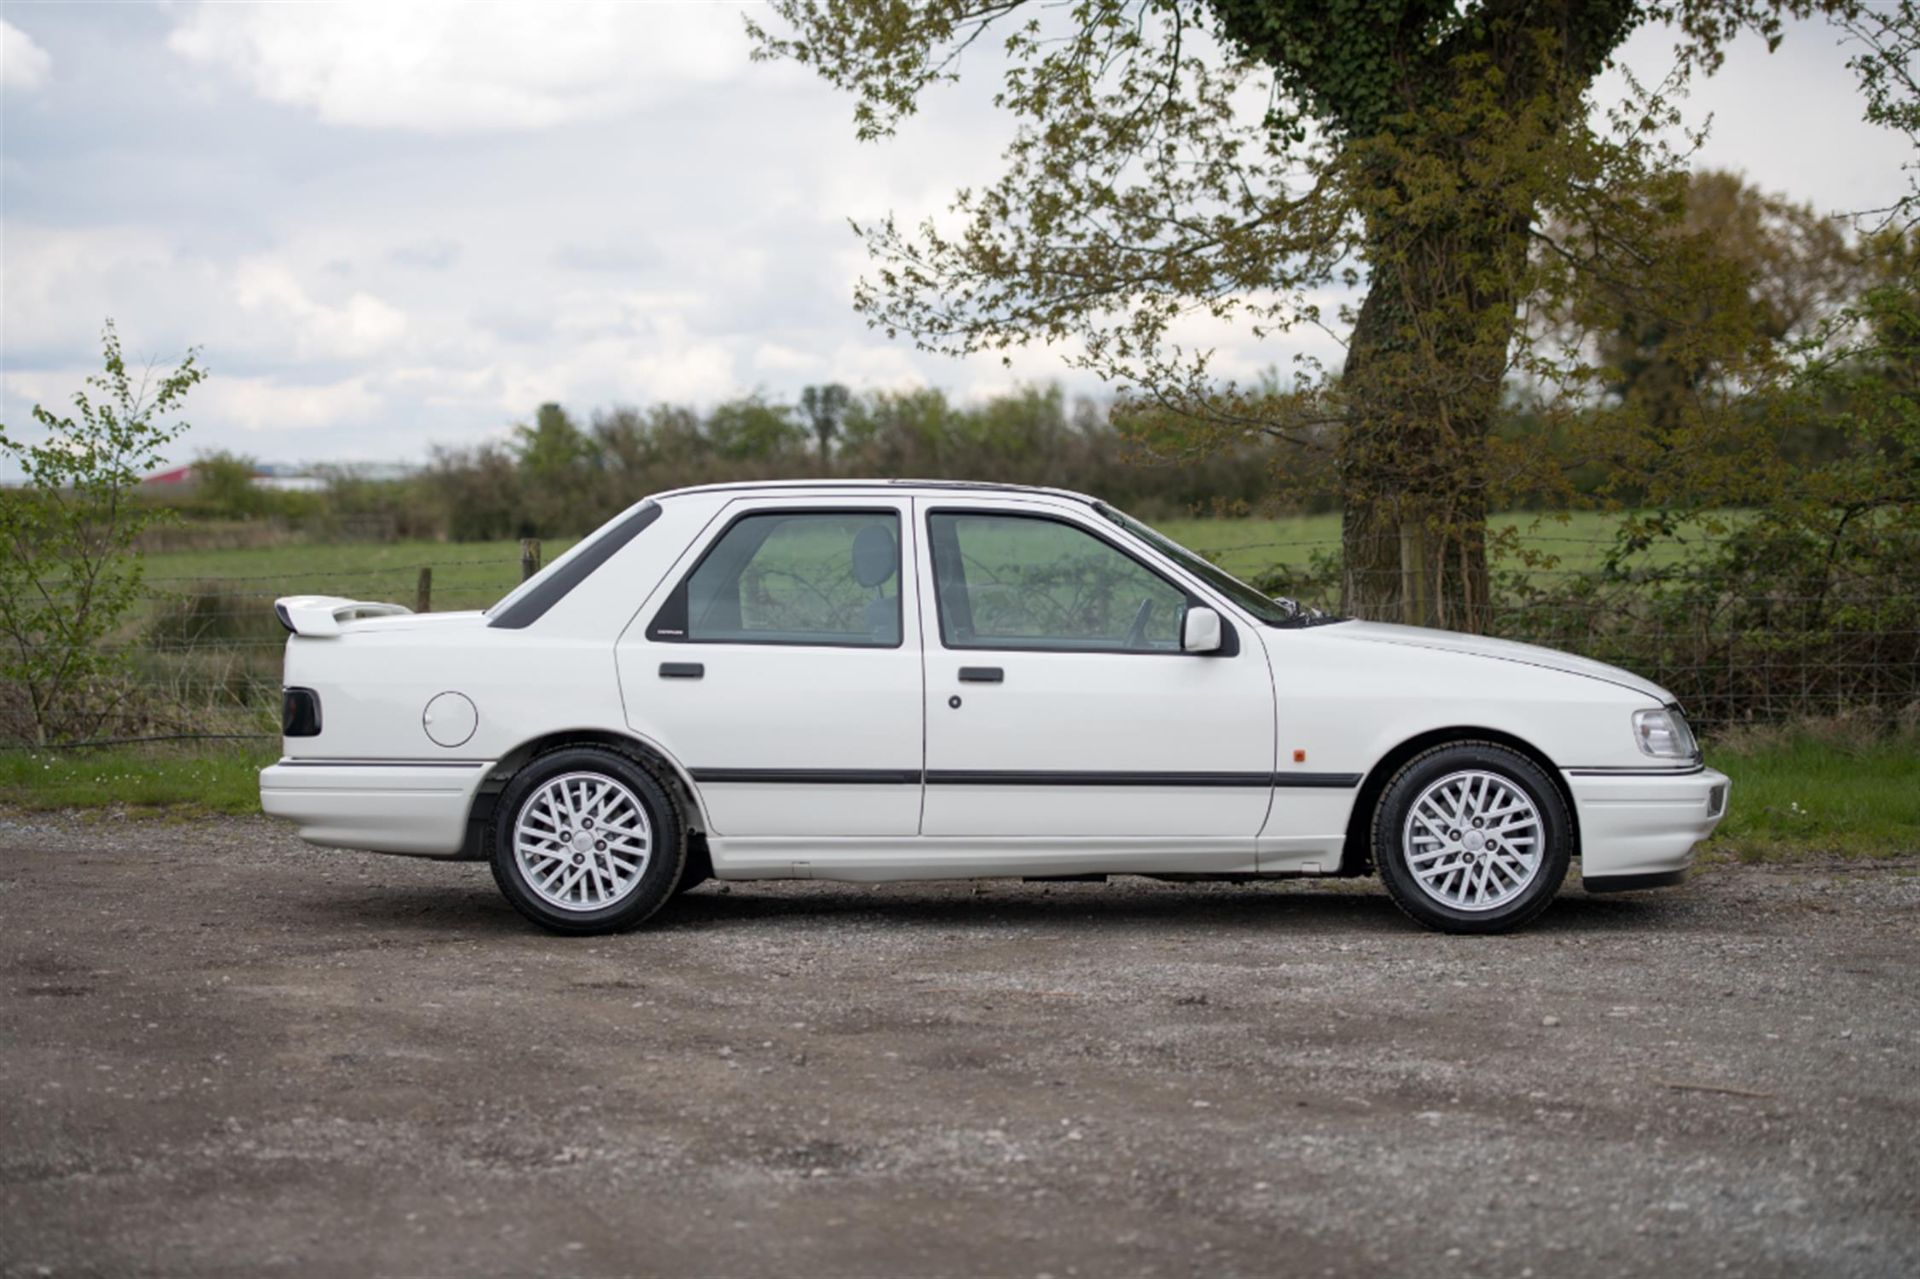 1989 Ford Sierra Sapphire RS Cosworth (2WD) - Image 5 of 10